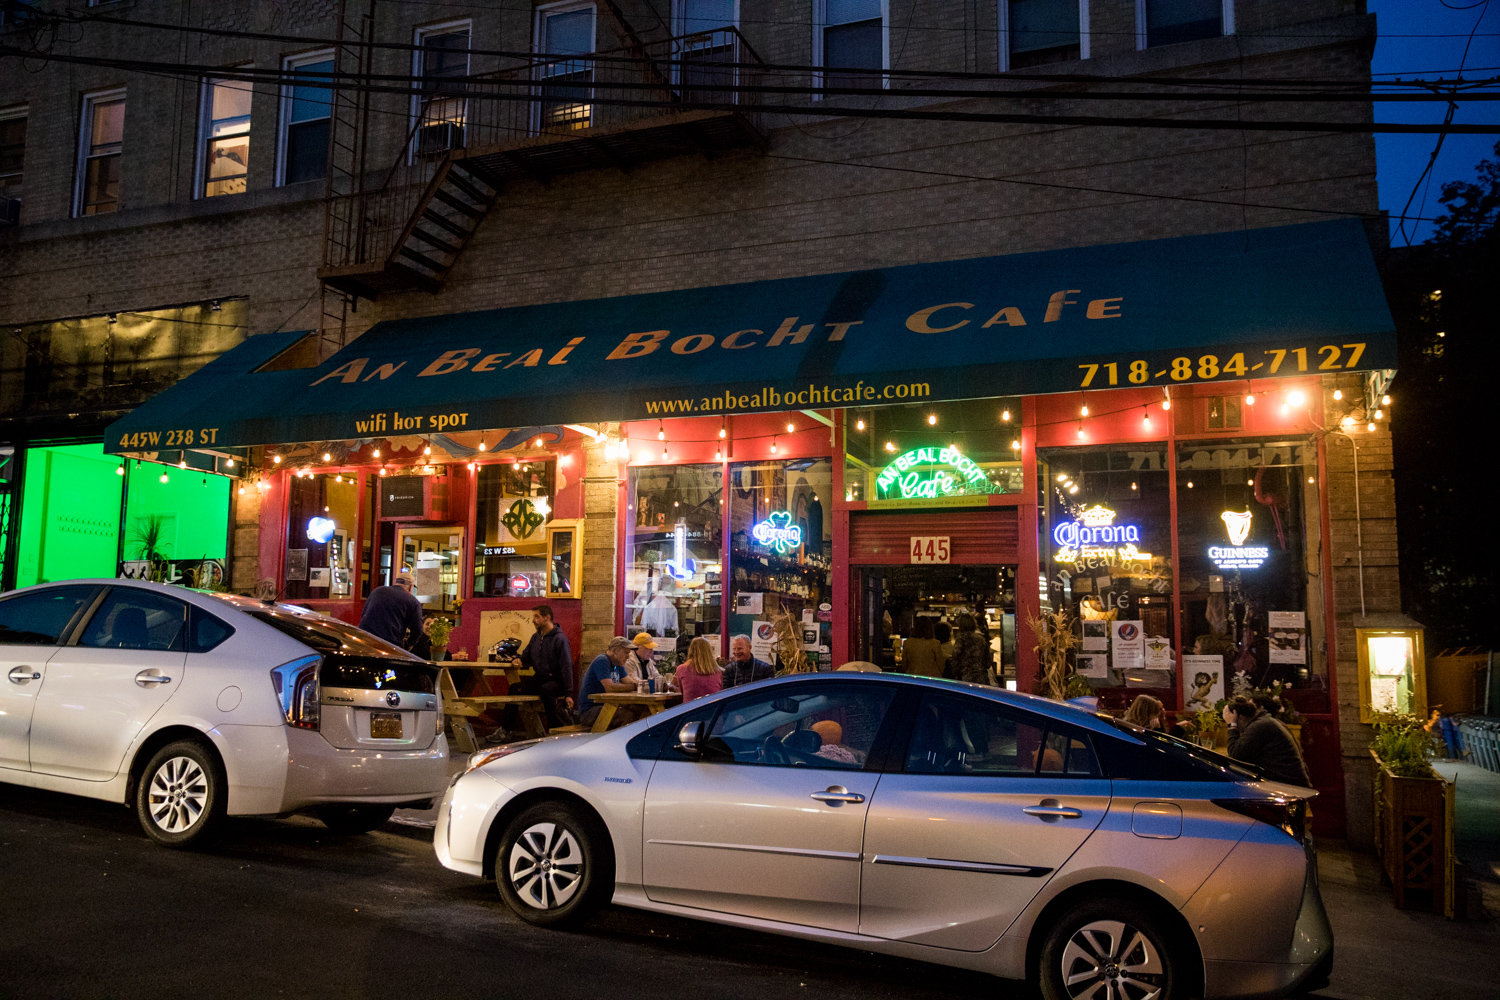 If West 238th Street is known for anything, it is An Beal Bocht Café, a pub with Irish roots catering to the neighborhood with a variety of shows like concerts and open mics.